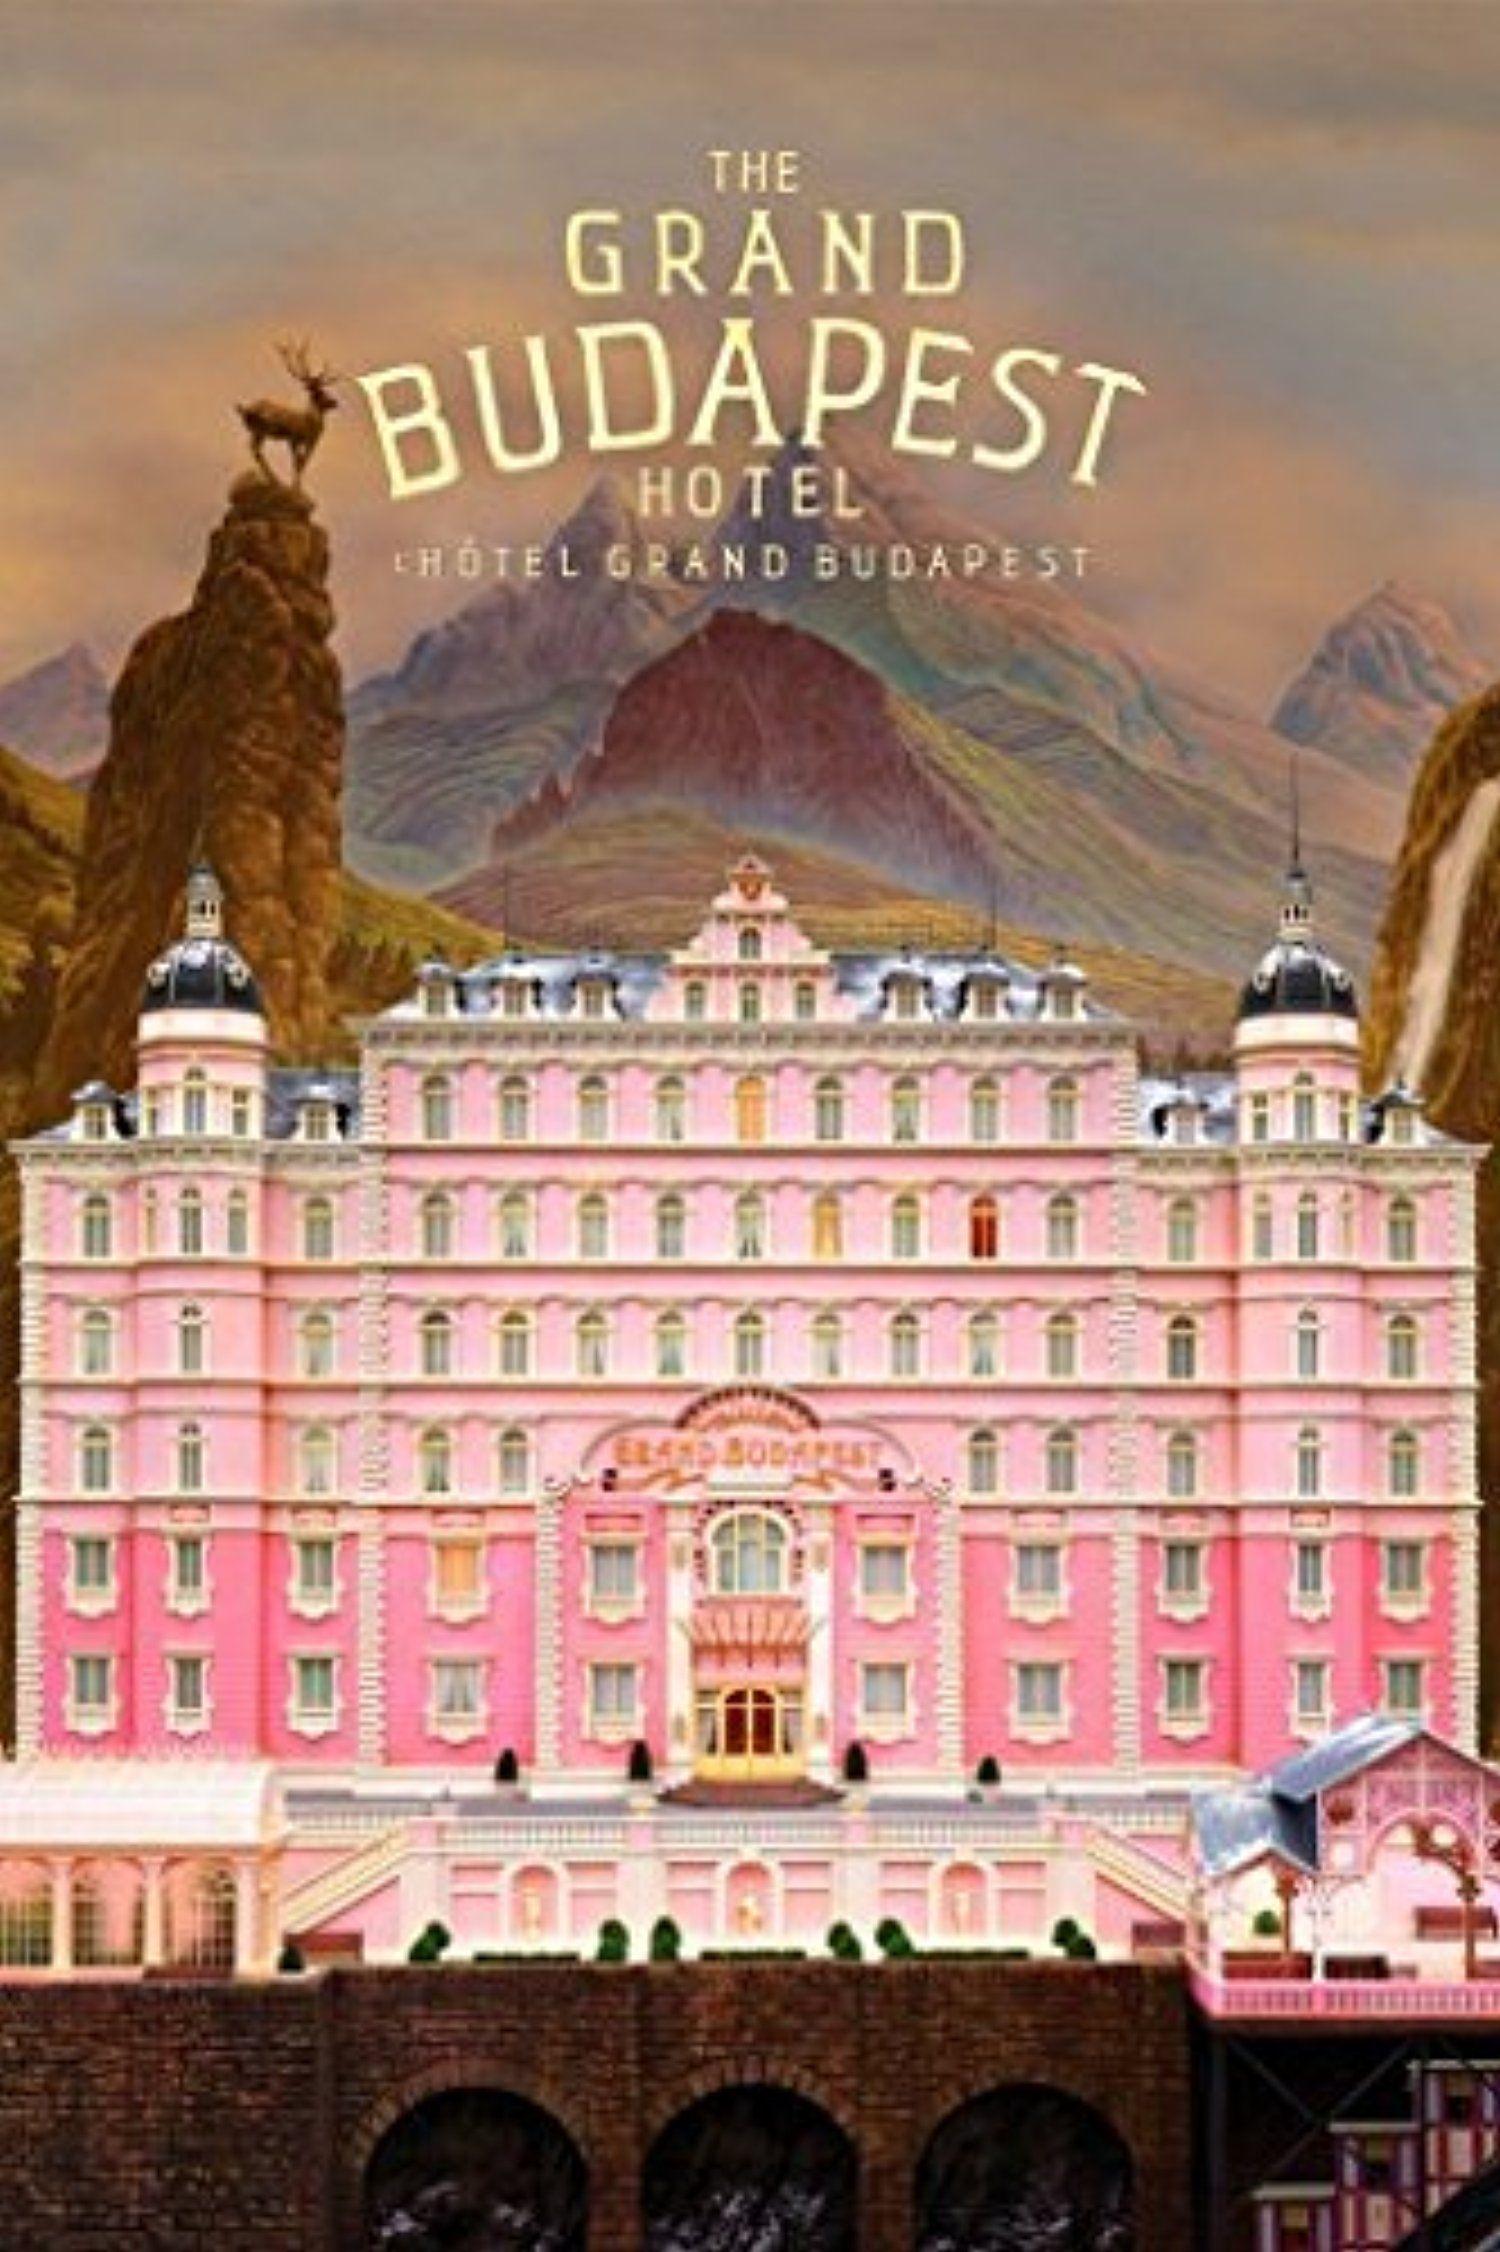 Decal Jewelry 008 The Grand Budapest Hotel 24 inch Silk Poster Aka